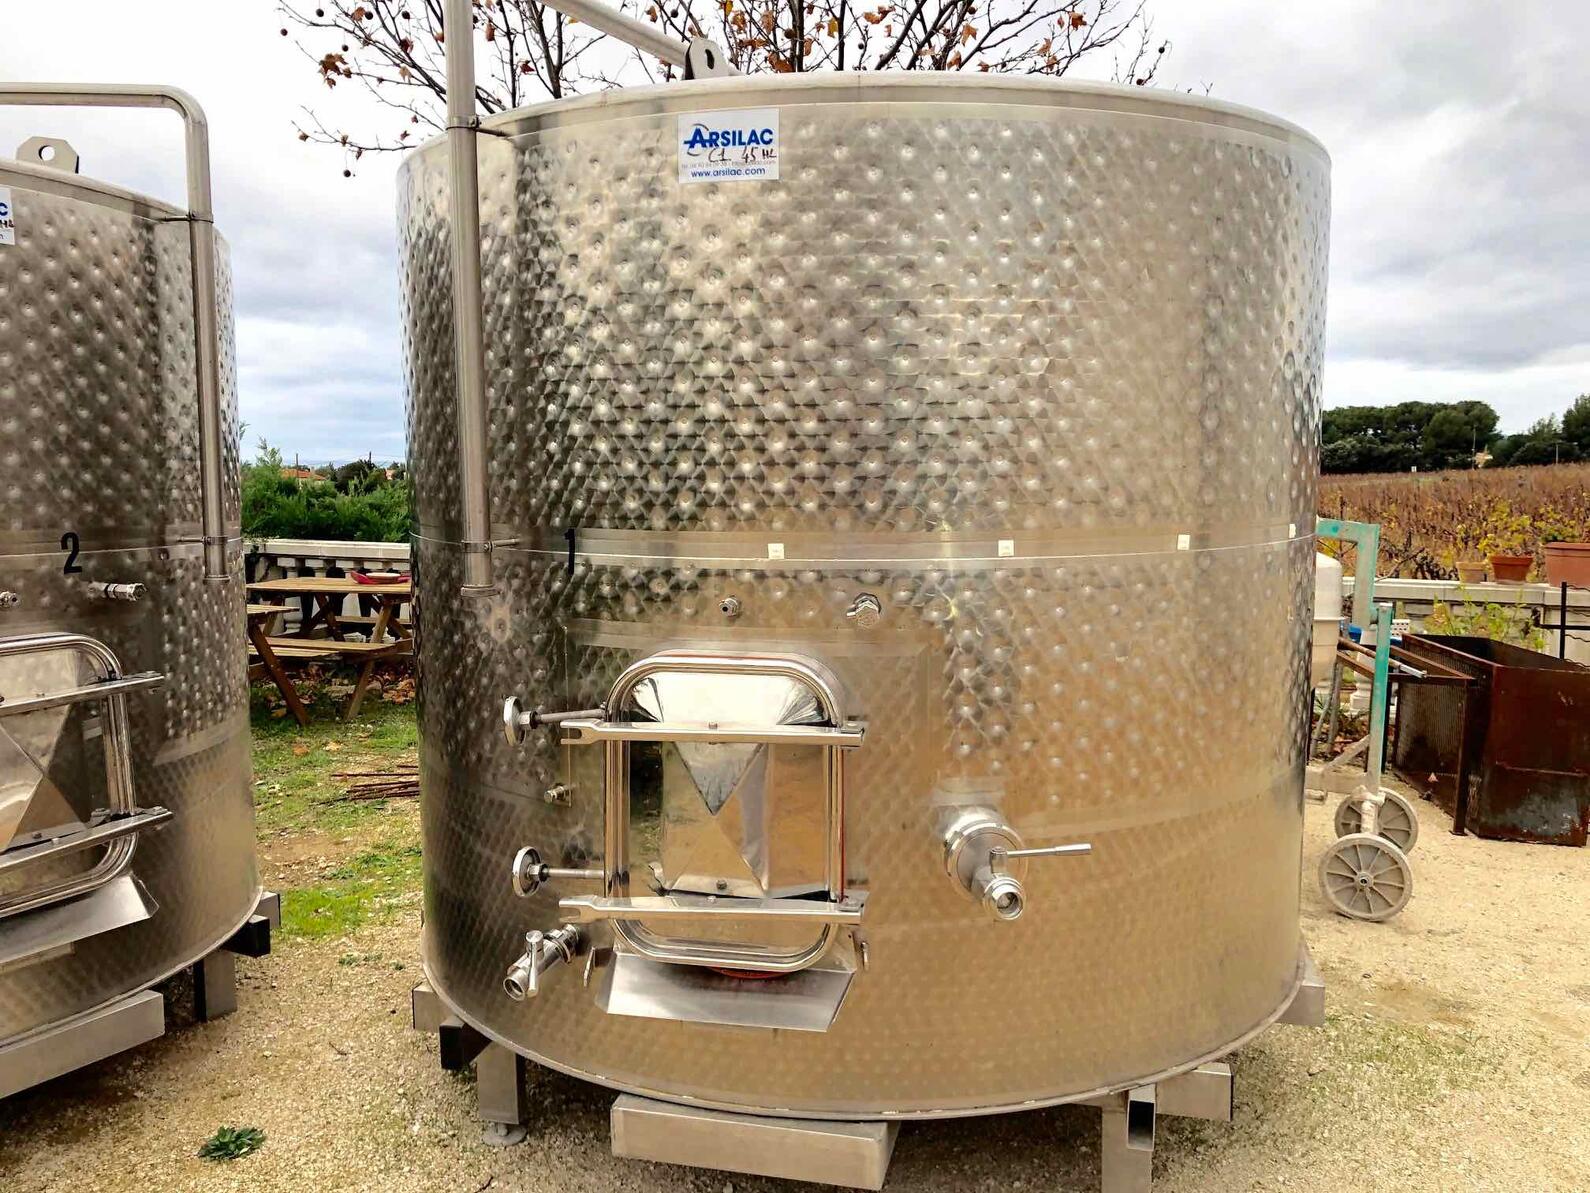 Stainless steel tank - Closed on the clock